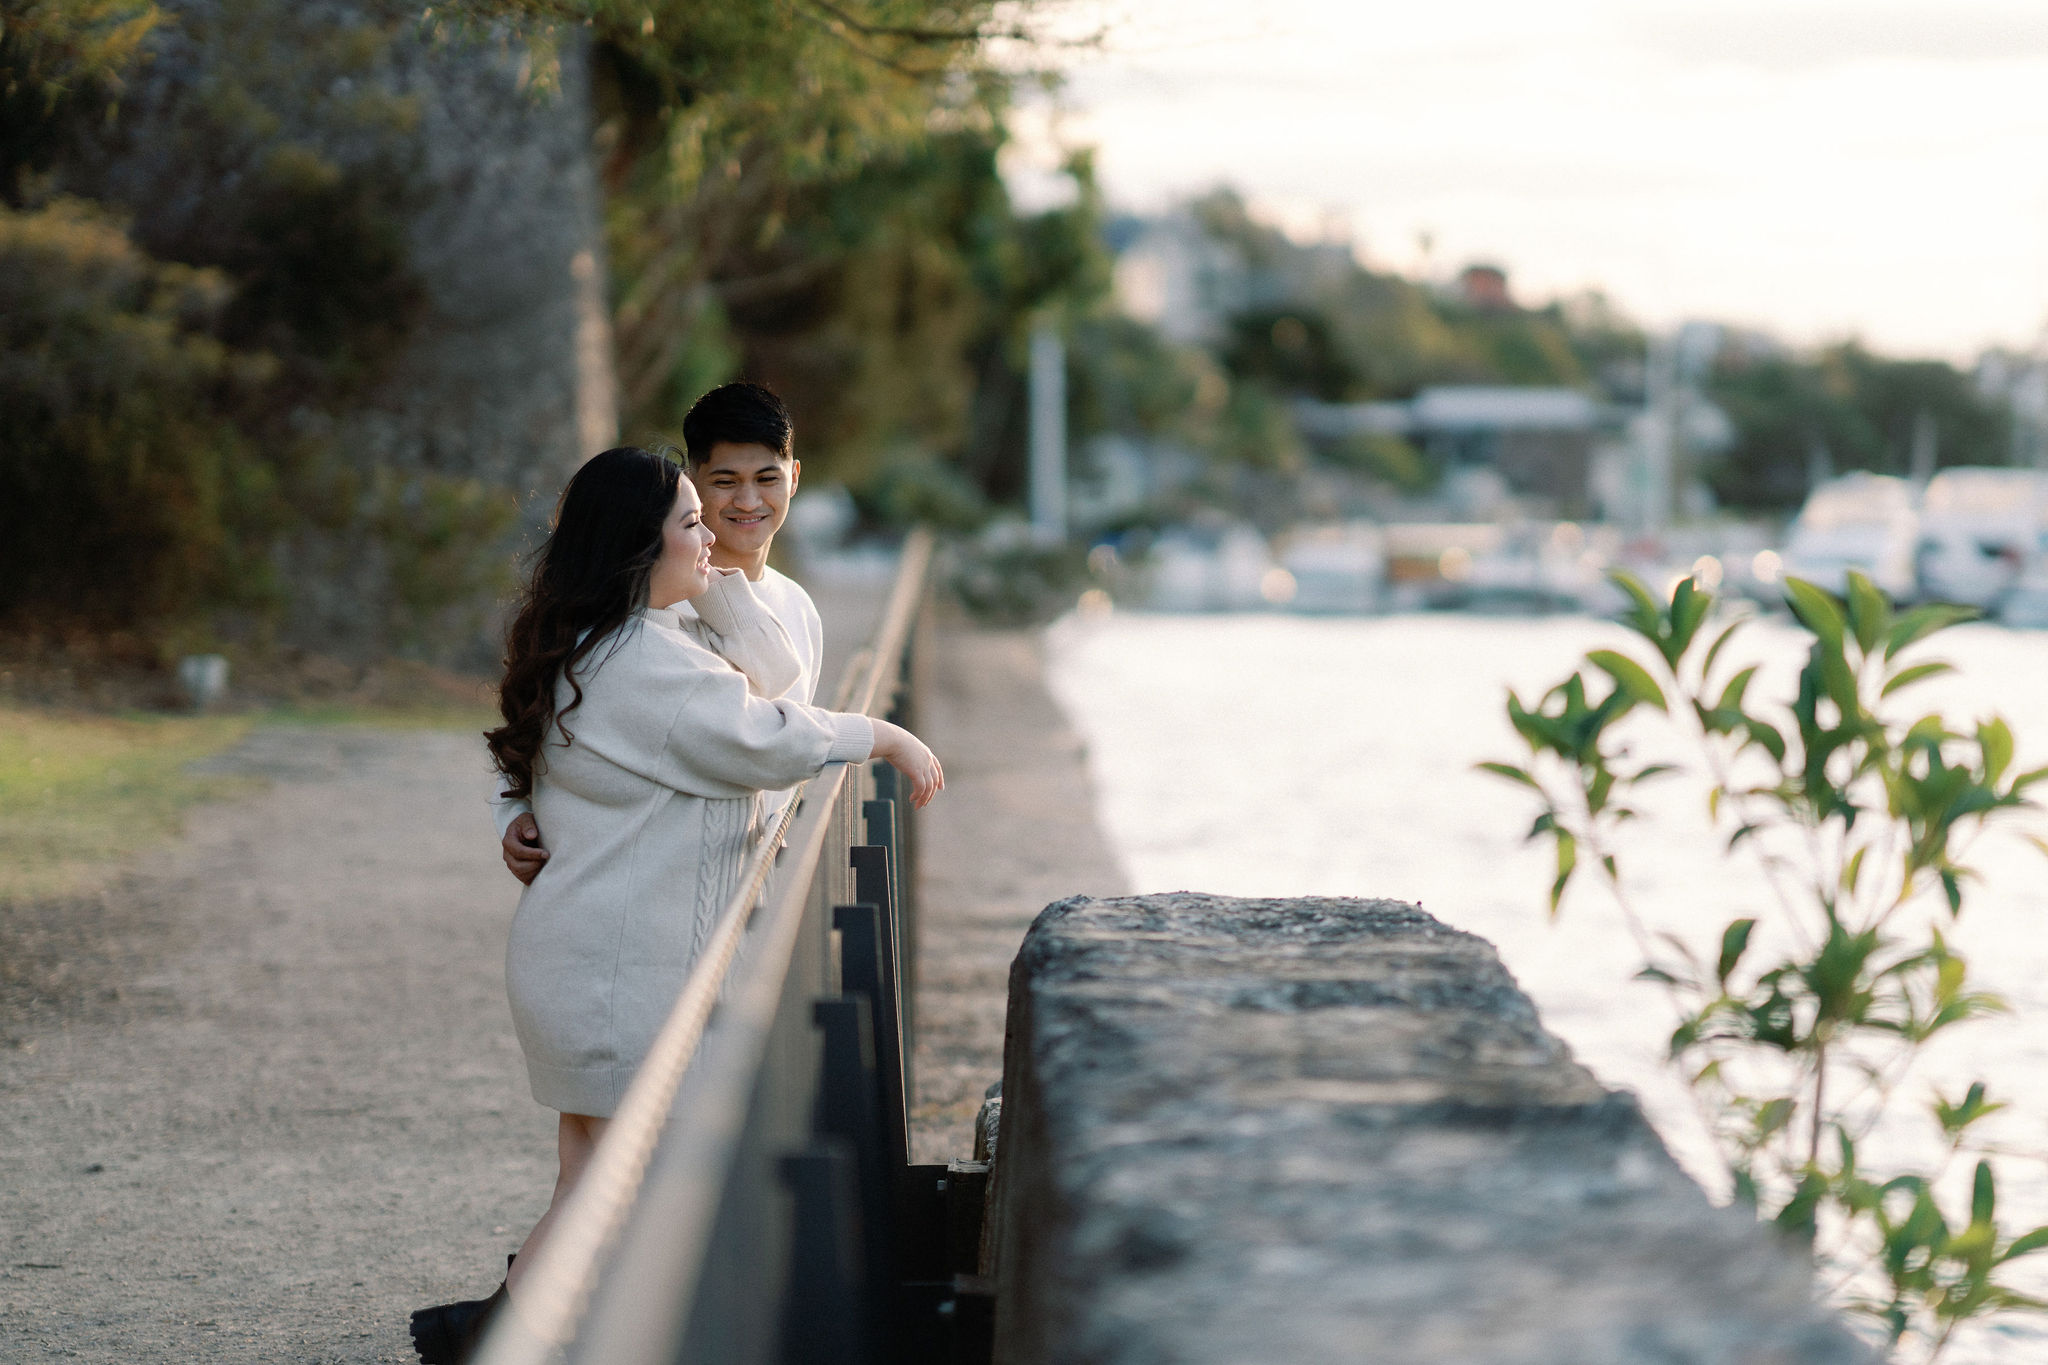 Pre-wedding Top 7 Date Ideas for your Photoshoot